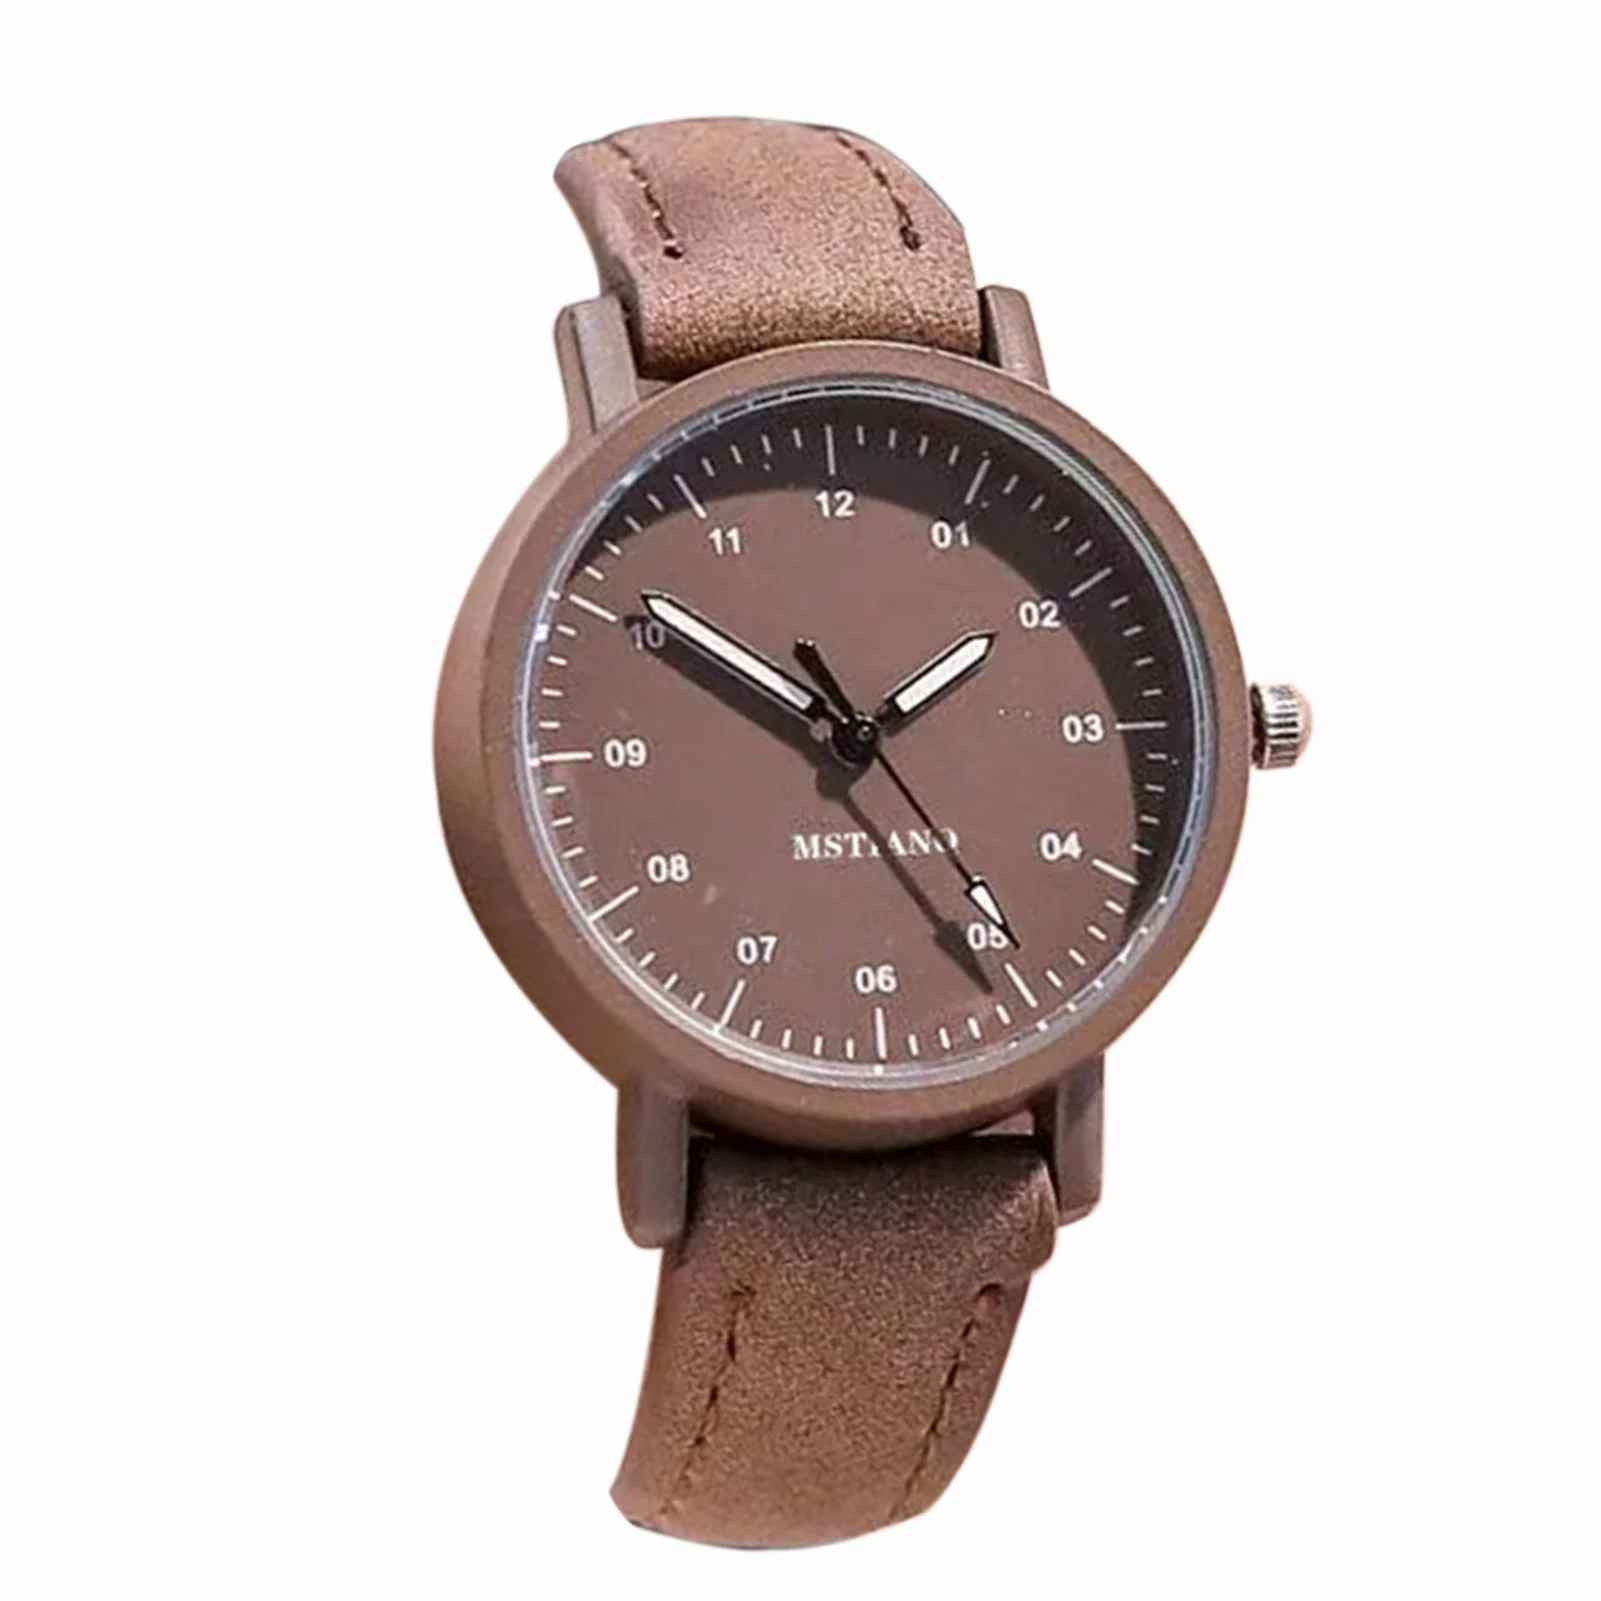 

New Hot Women's Fashion Quartz Watch 3-Hand Easy to Read Analog Simple Wristwatches for Unisex Working and Office